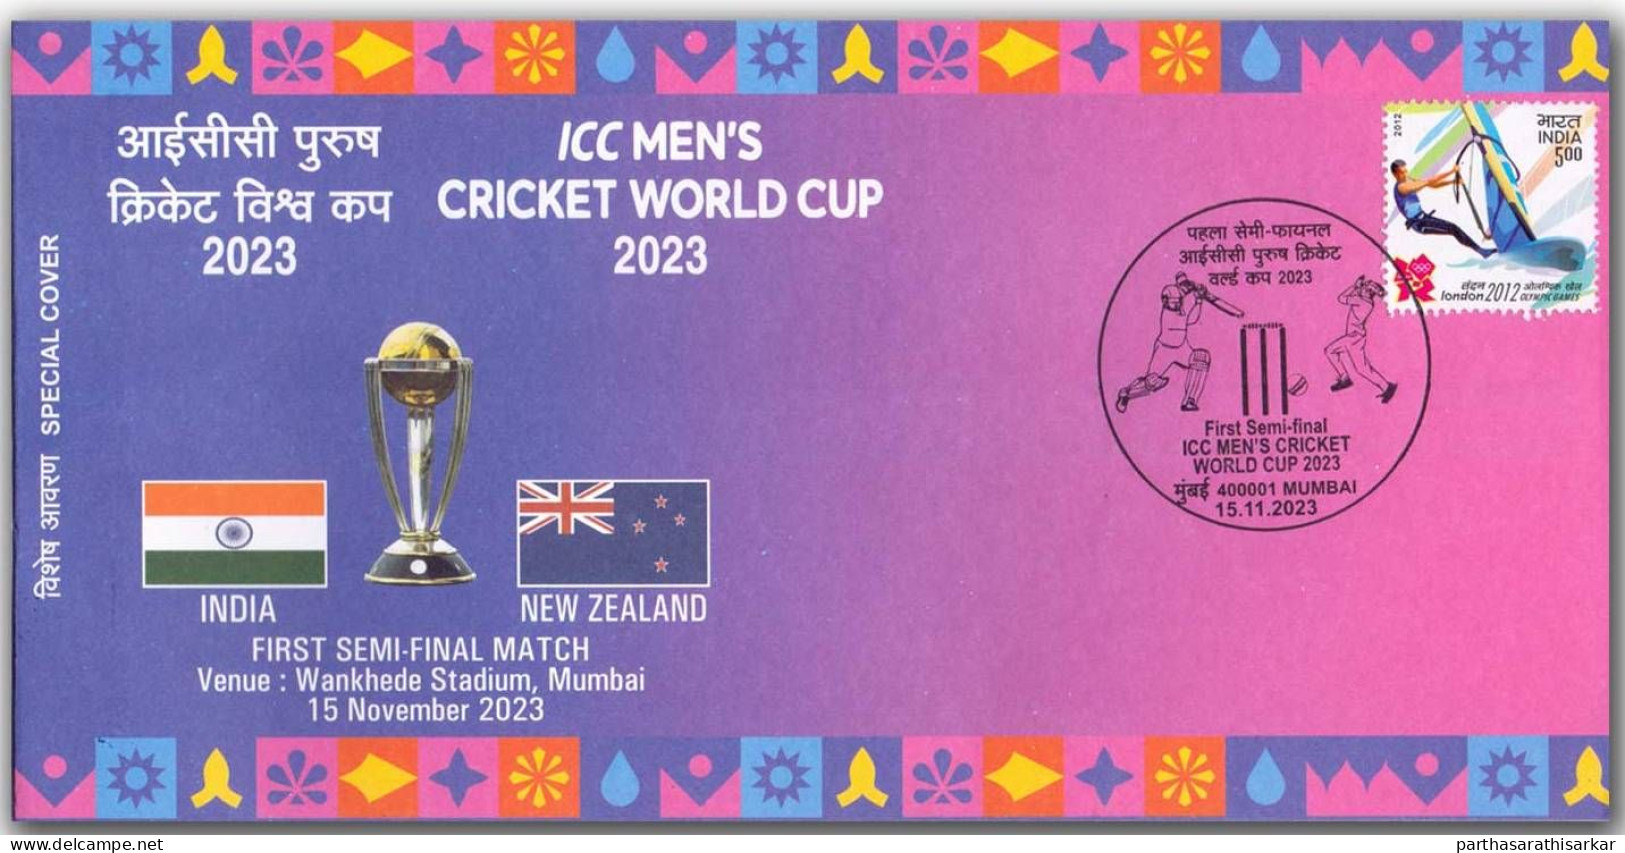 INDIA 2023 ICC MEN’S CRICKET WORLD CUP 2023 SPECIAL COVER USED ISSUED BY INDIA POST MUMBAI CIRCLE RARE - Covers & Documents